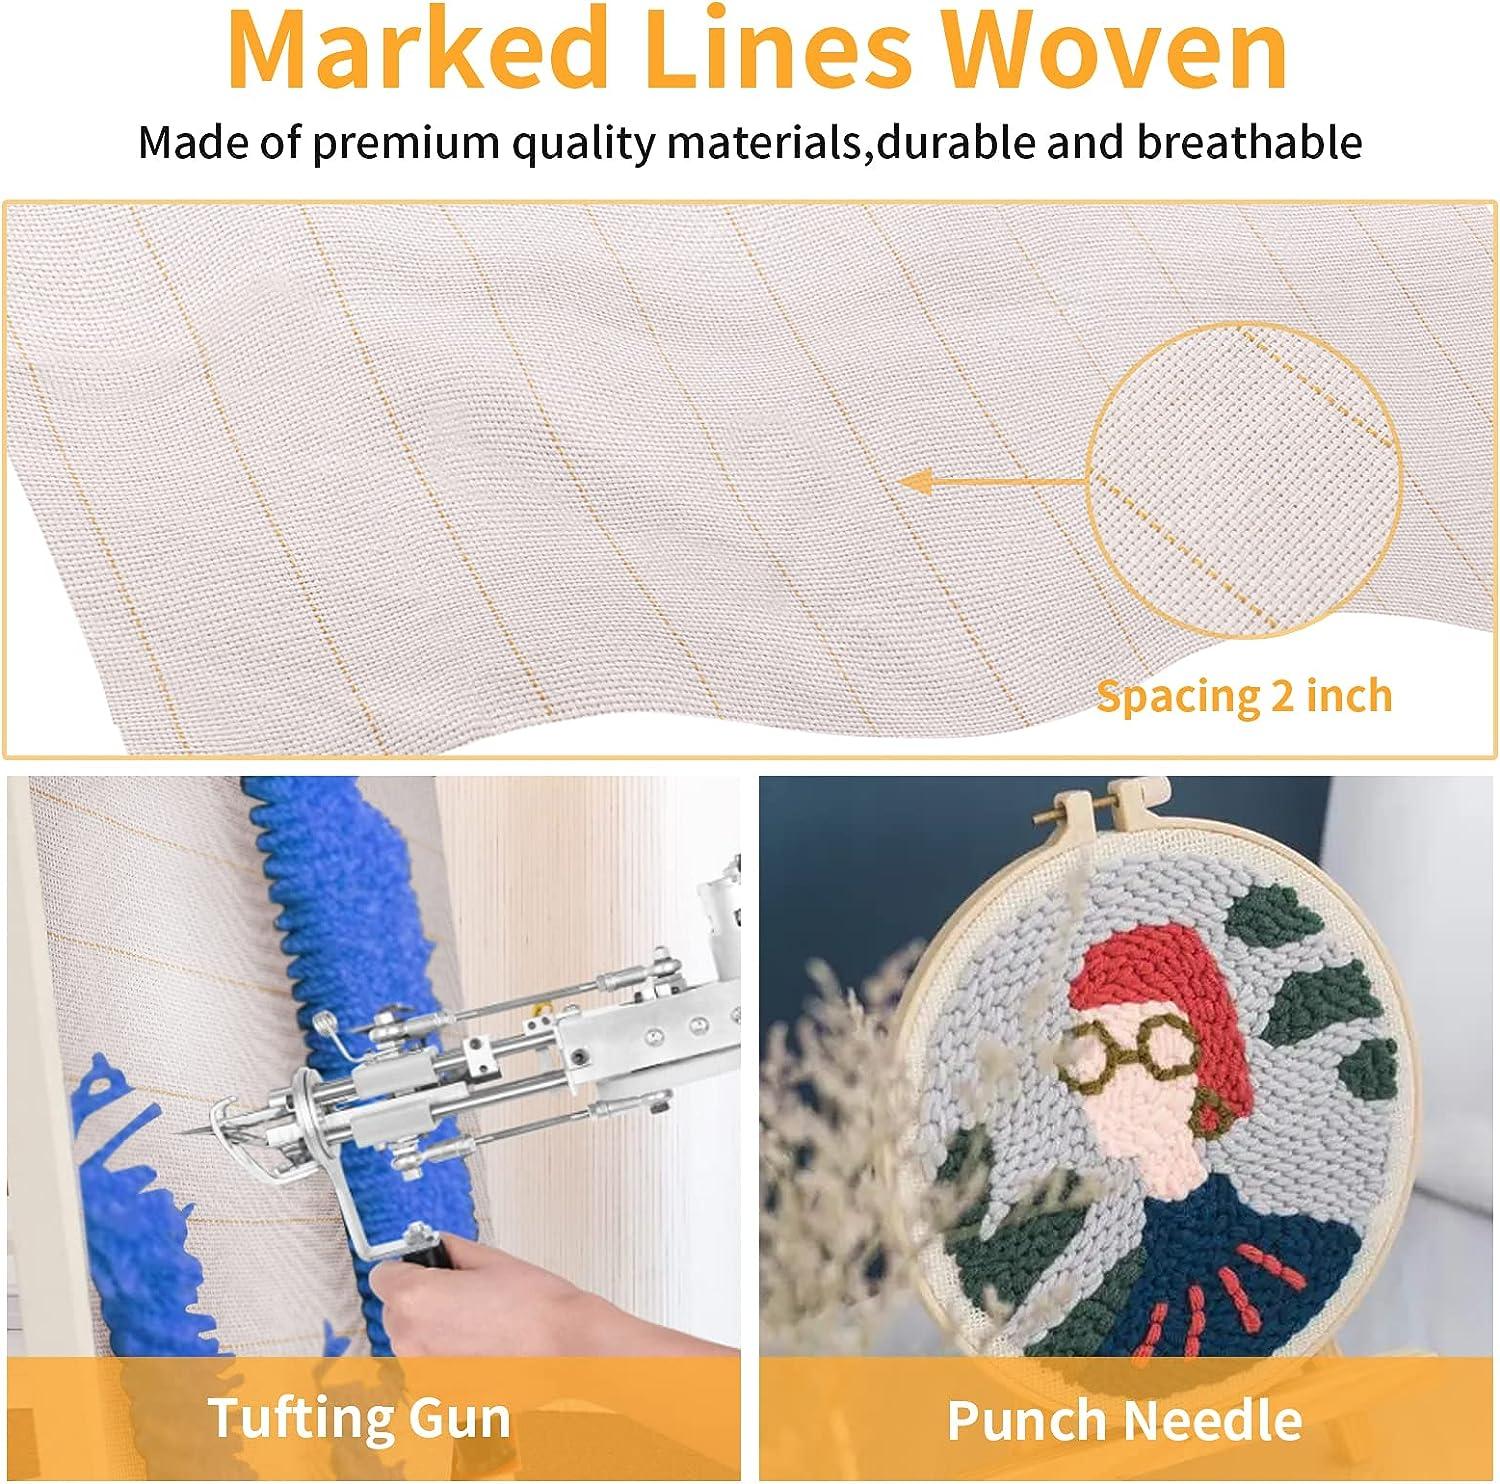 40 × 40 Large Overlocking Tufting Cloth with Marked Lines- Primary Monk's  Cloth Punch Needle Fabric for DIY Rug-Punch Tufting Gun